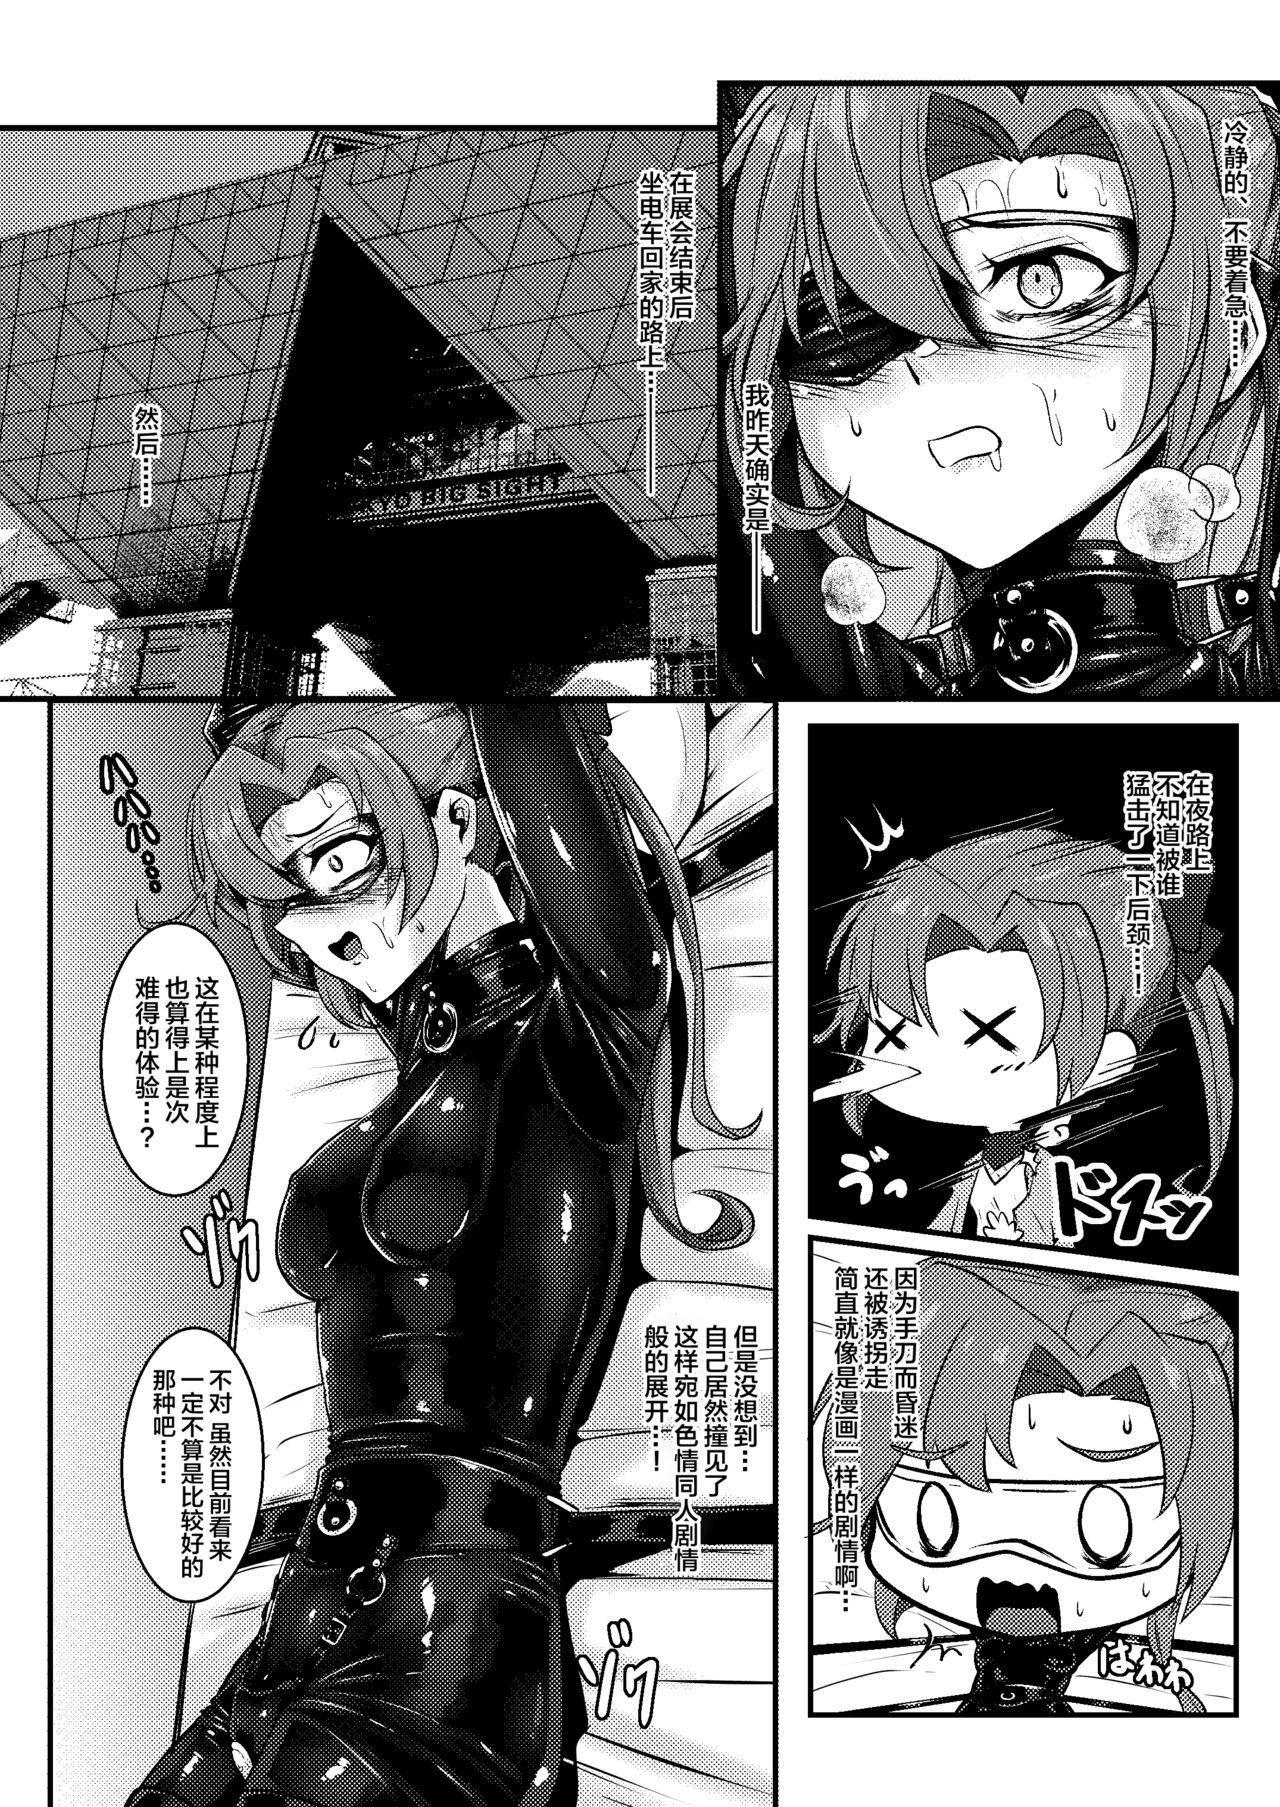 Candid Revenge is sweet - Kantai collection Gorda - Page 6